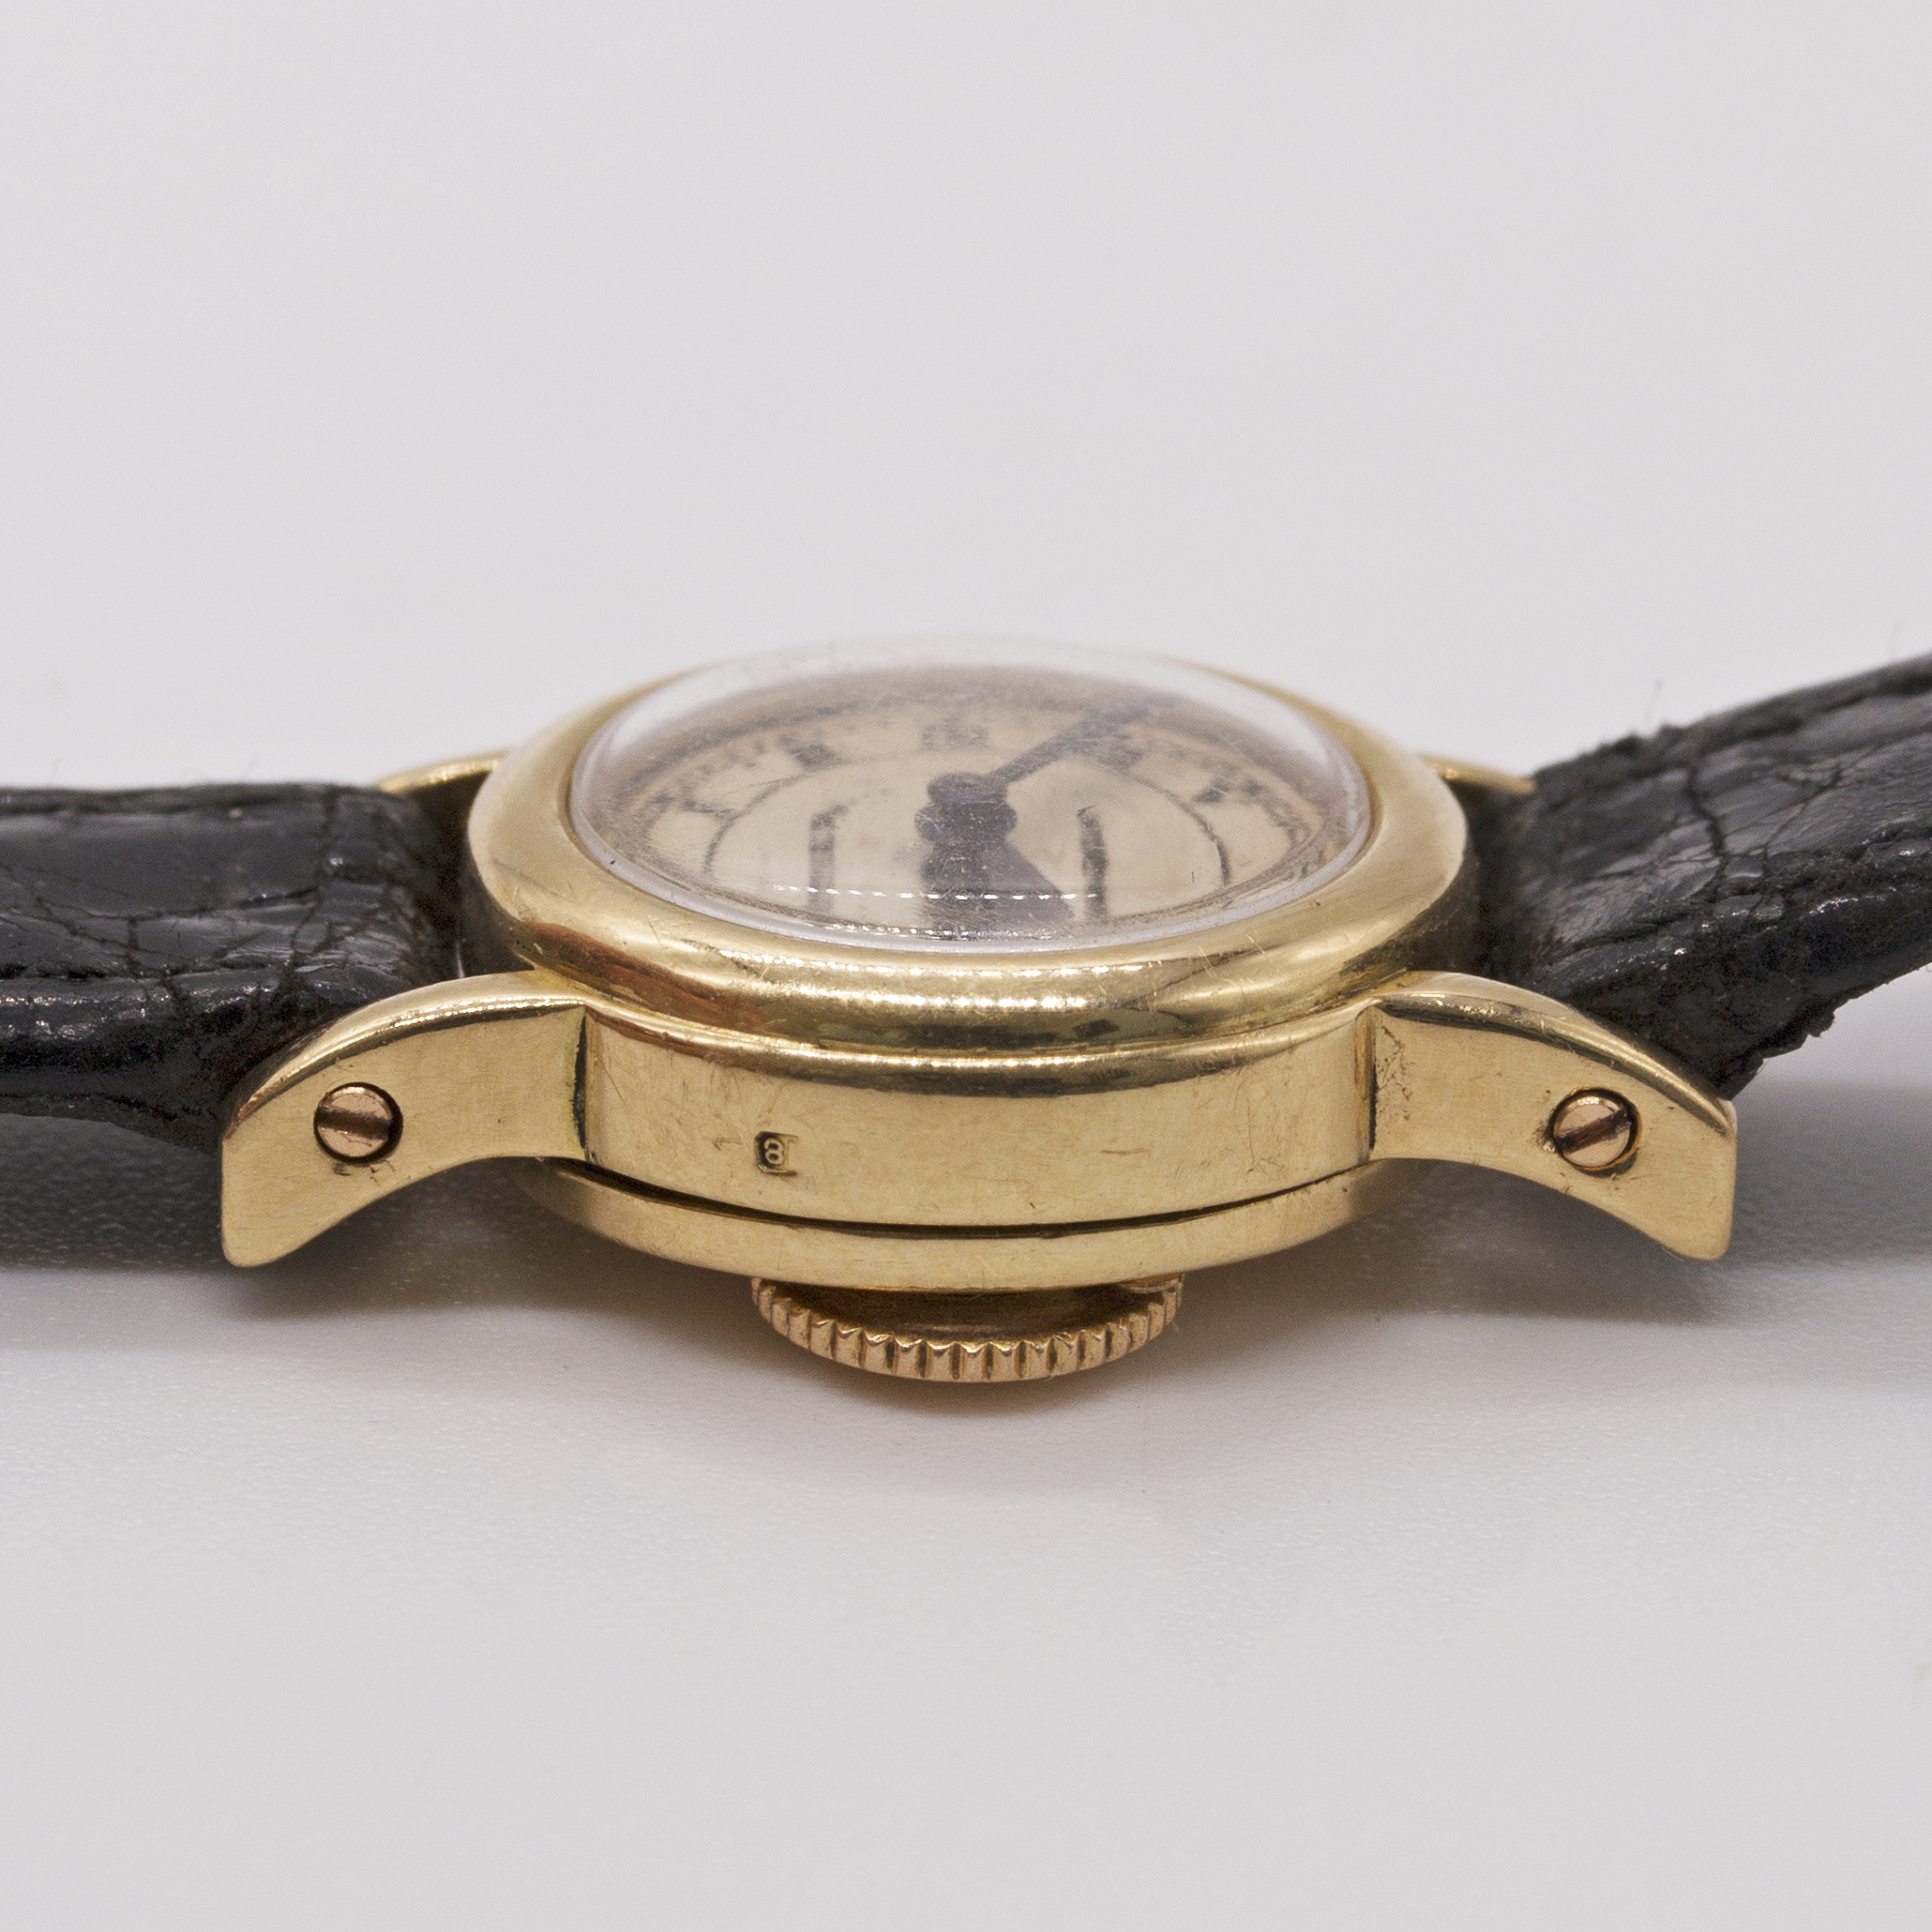 A RARE LADIES 18K SOLID GOLD CARTIER LONDON BACKWIND WRIST WATCH CIRCA 1961, WITH LONDON HALLMARKS - Image 7 of 8